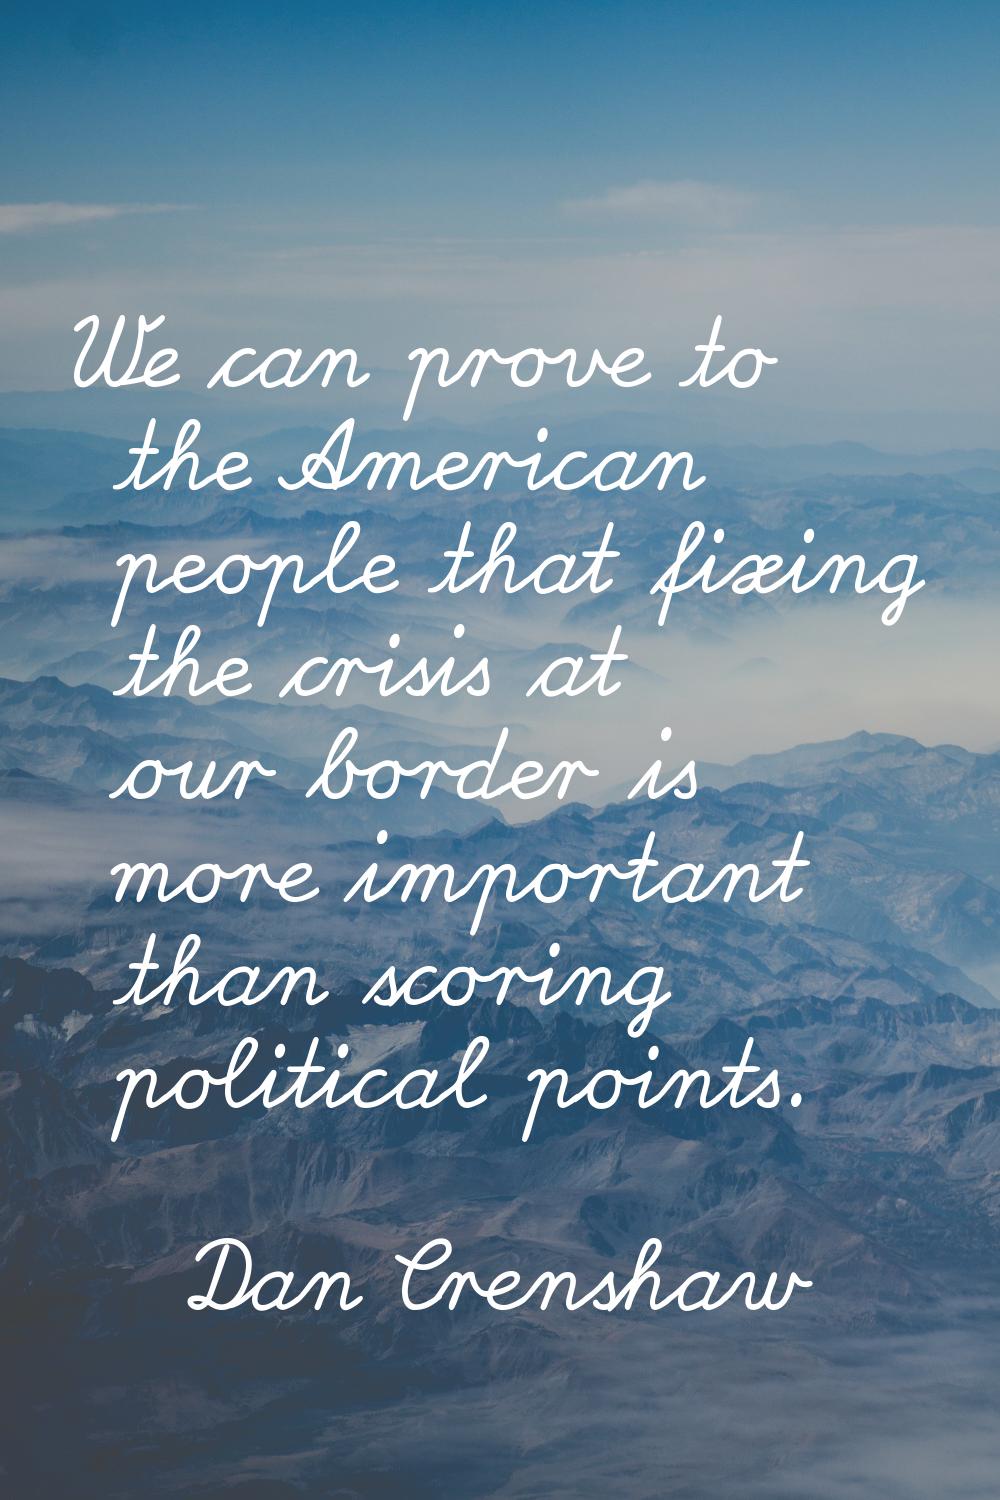 We can prove to the American people that fixing the crisis at our border is more important than sco